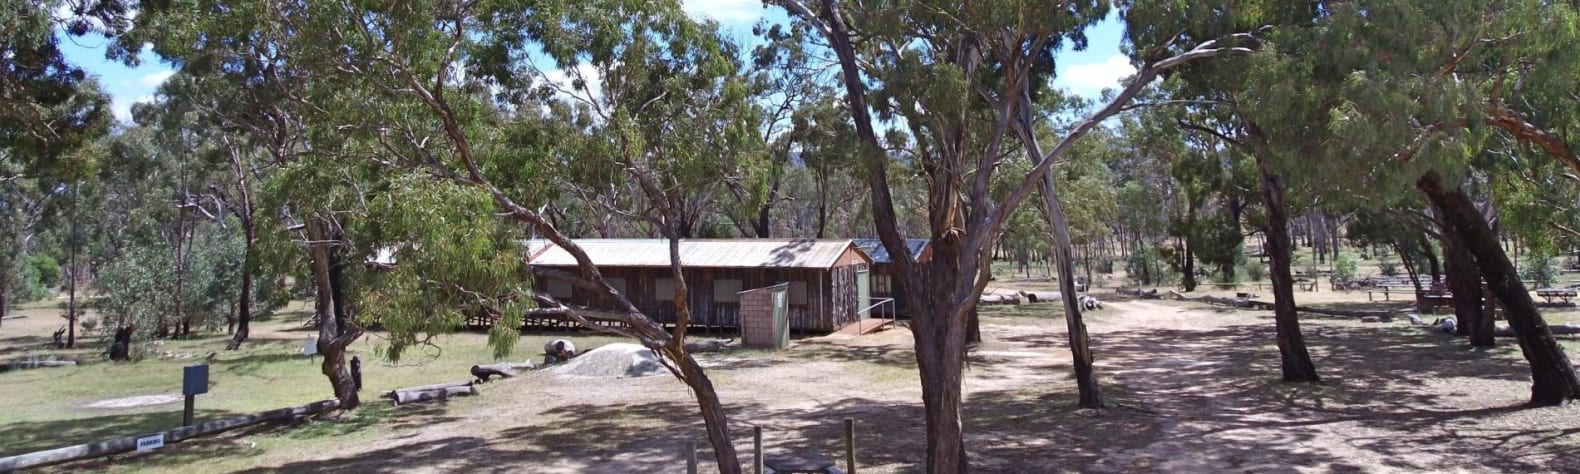 Cooinda Burrong Scout Camp